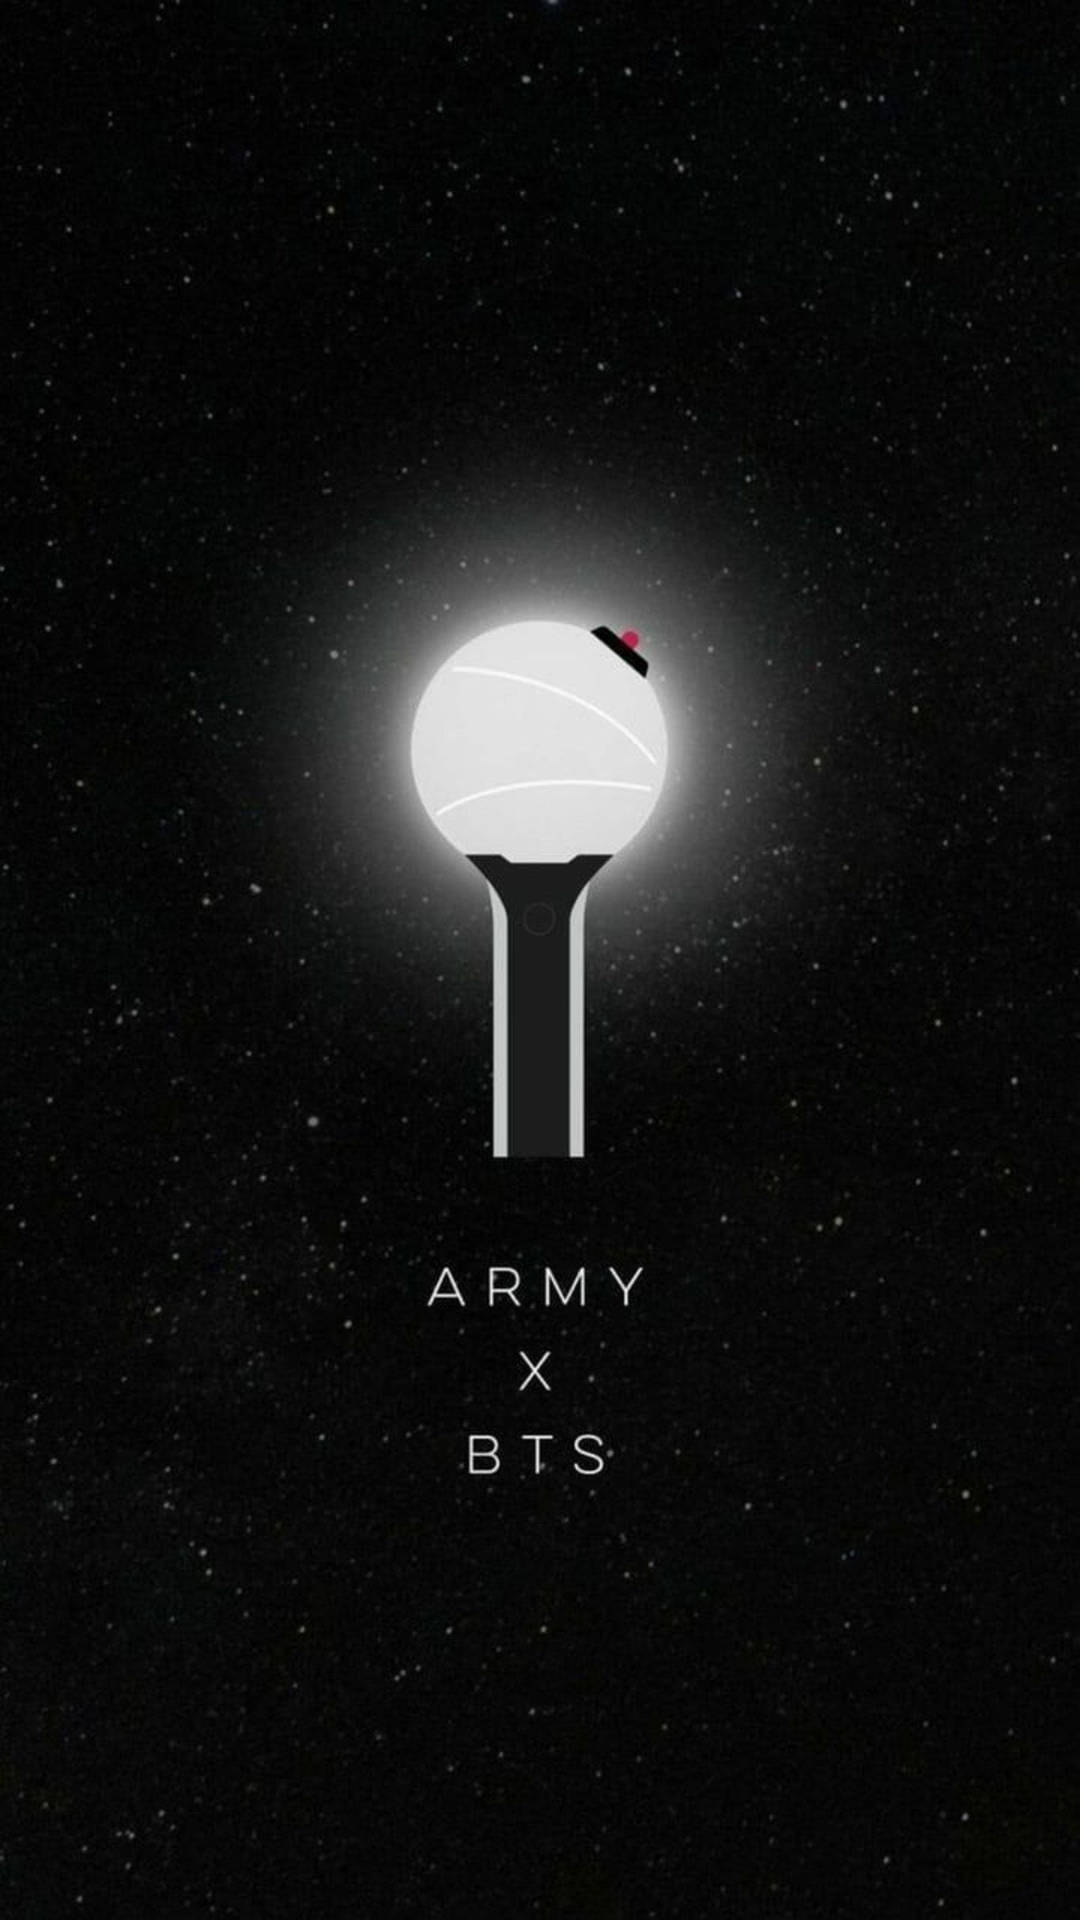 Bts Army Wallpaper Full HD, 4K Free to Use